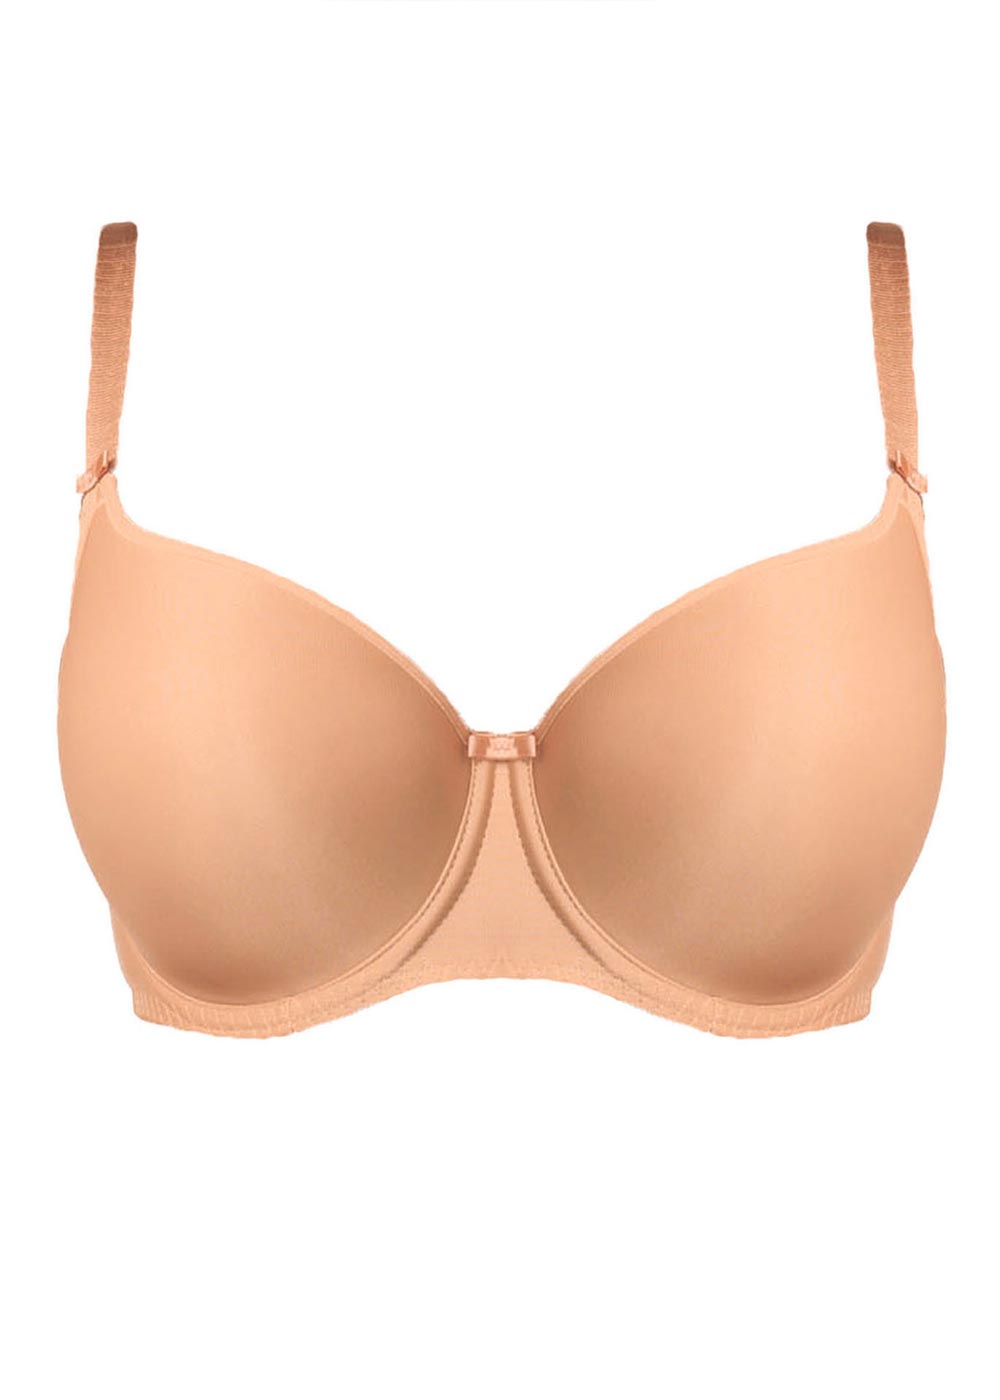 Fantasie Smoothing Molded Underwire Balcony Bra, Color-Nude, Size